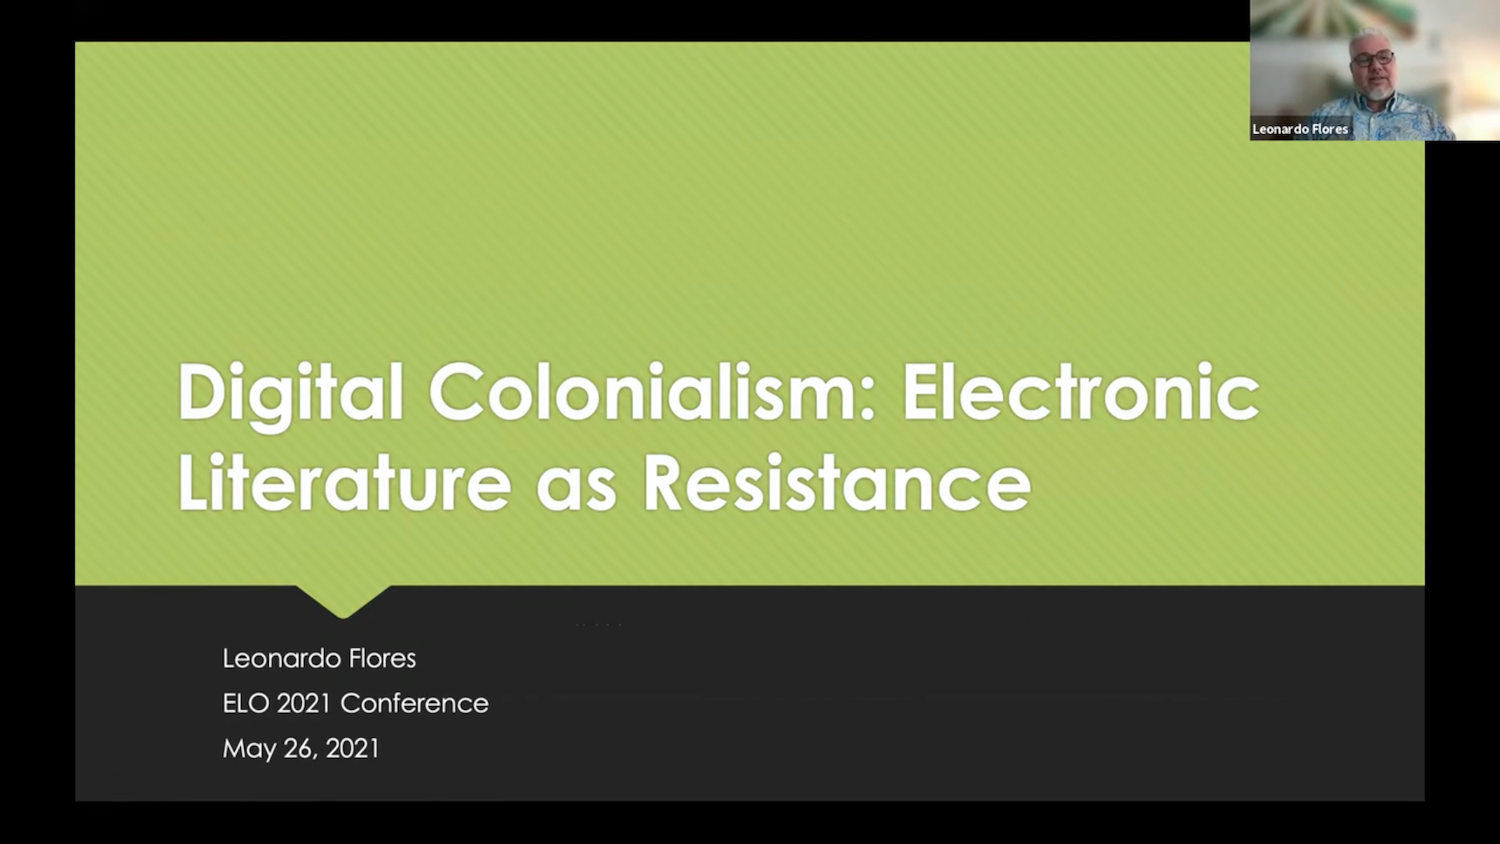 Screenshot of slideshow title: Digital Colonialism: Electronic Literature as Resistance